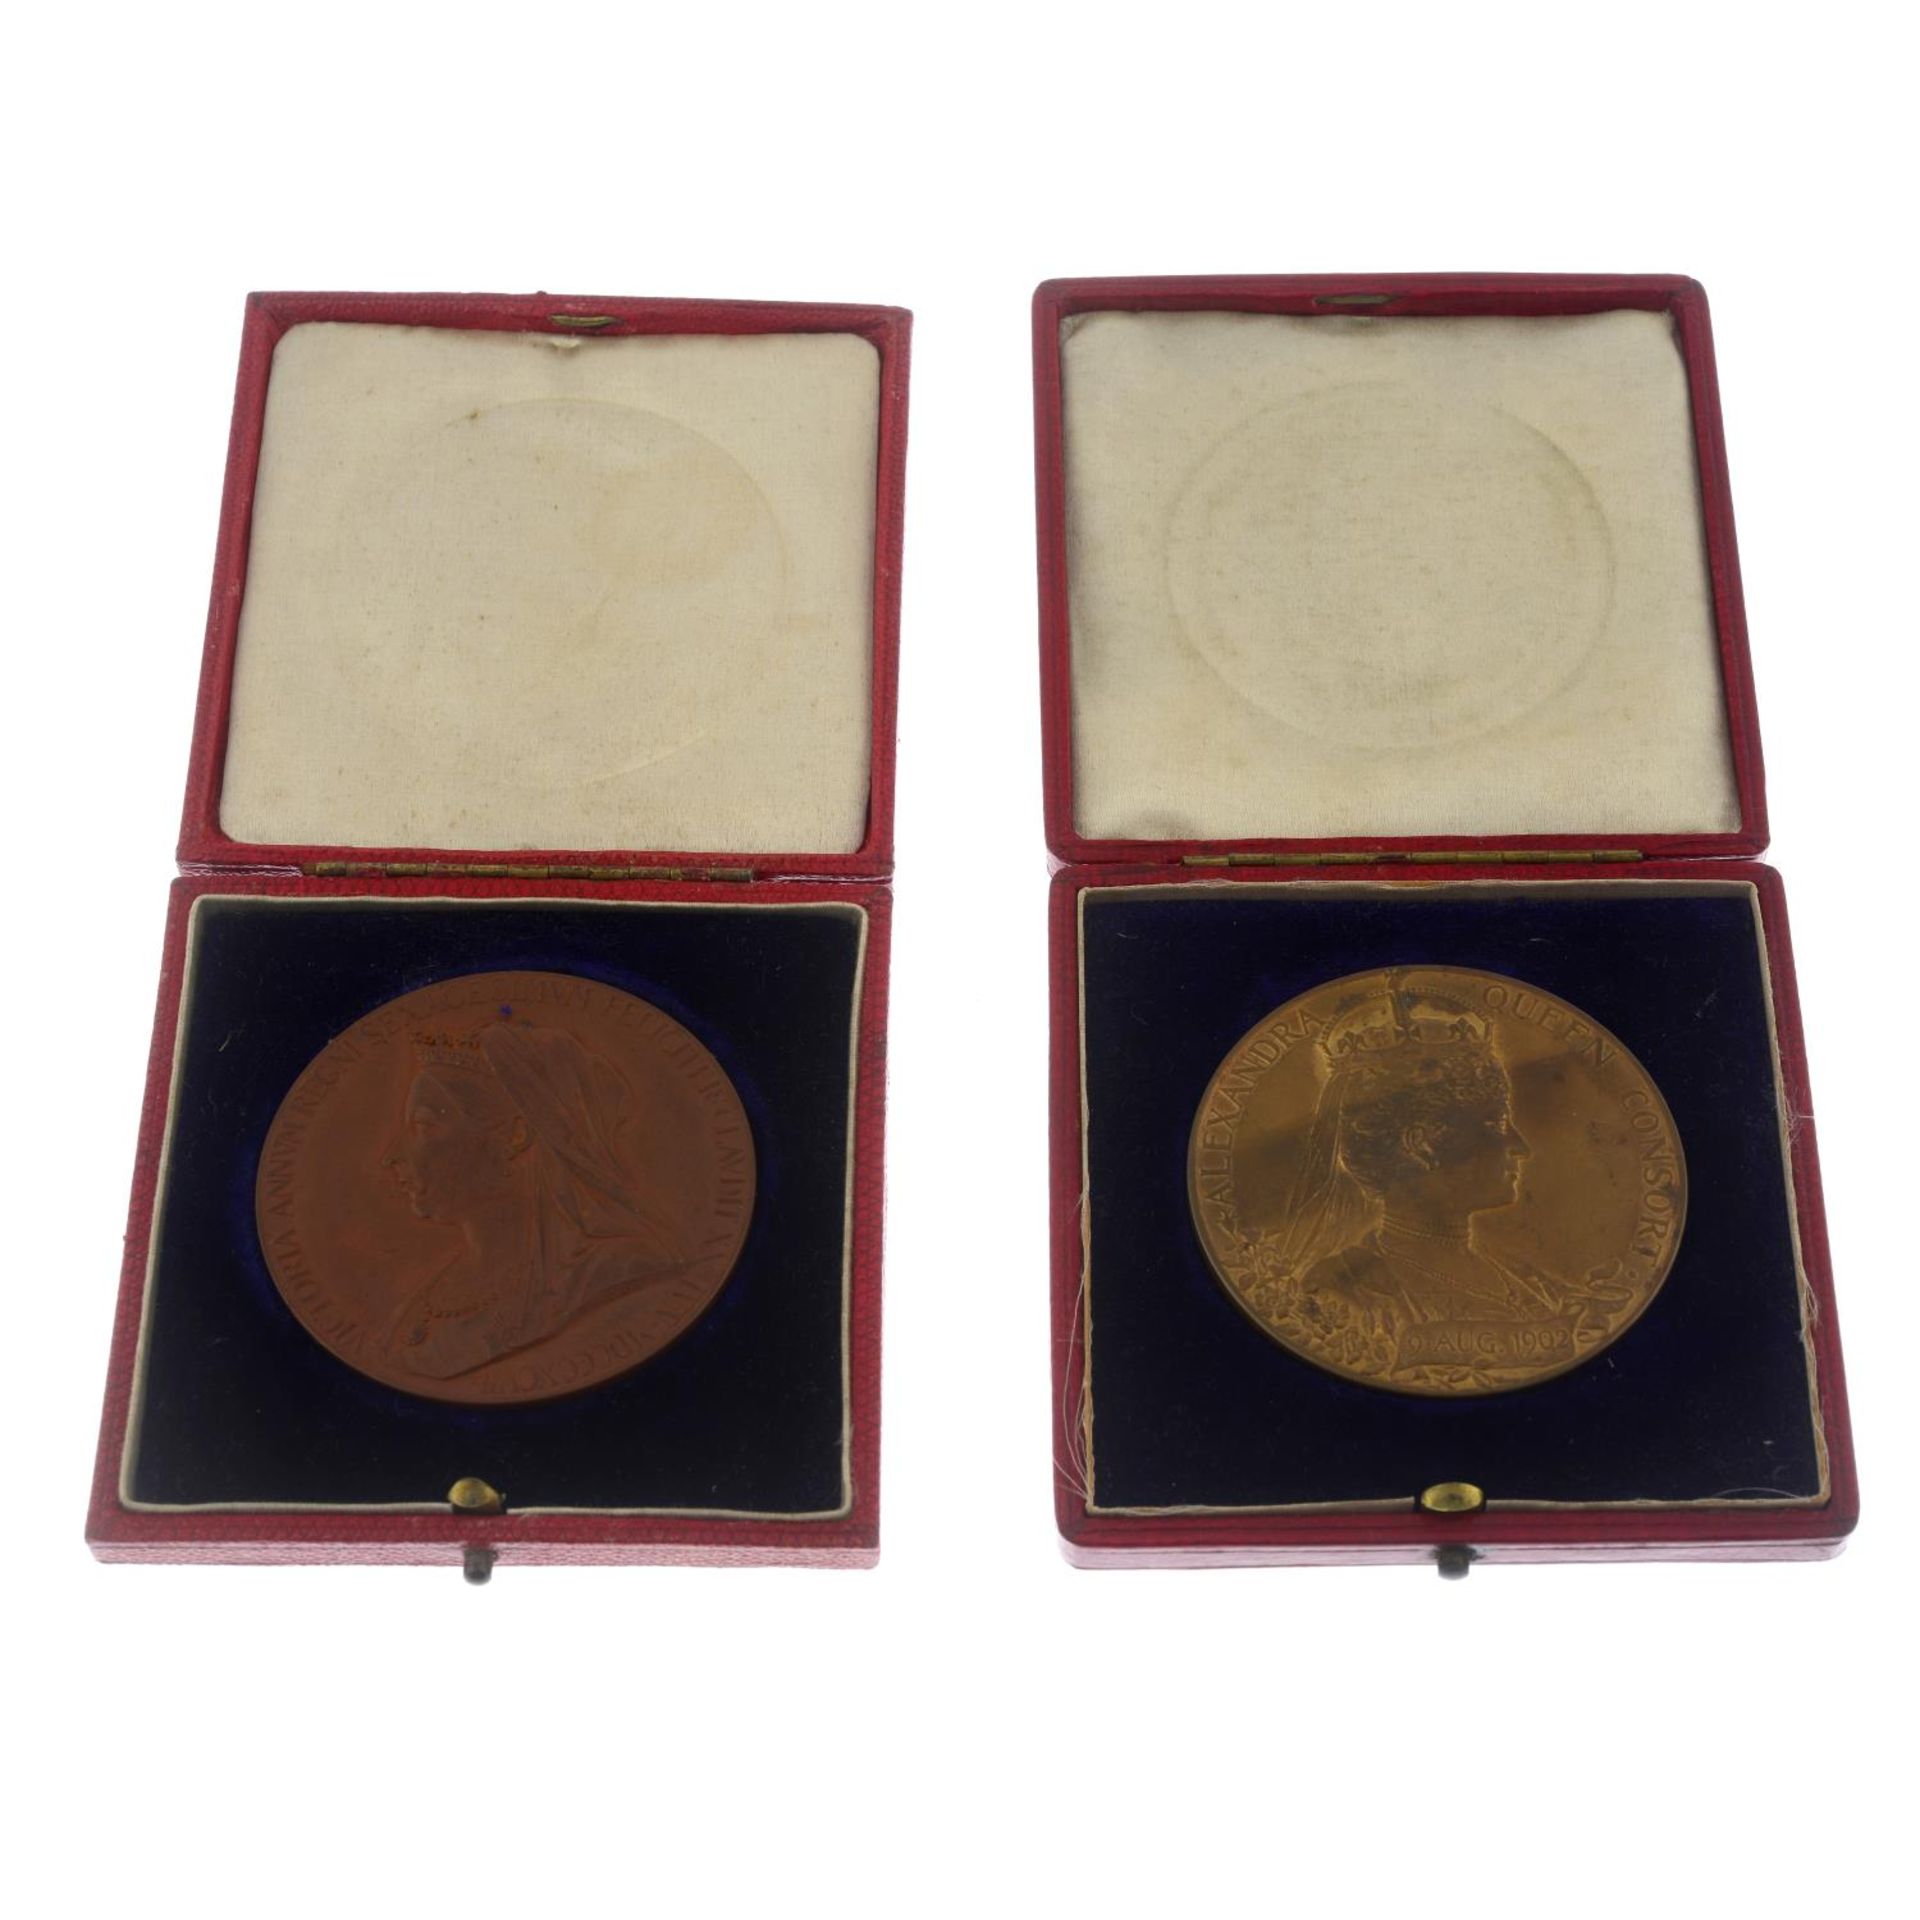 Edward VII, 1902 bronze coronation commemorative medallion in original fitted case; together with a